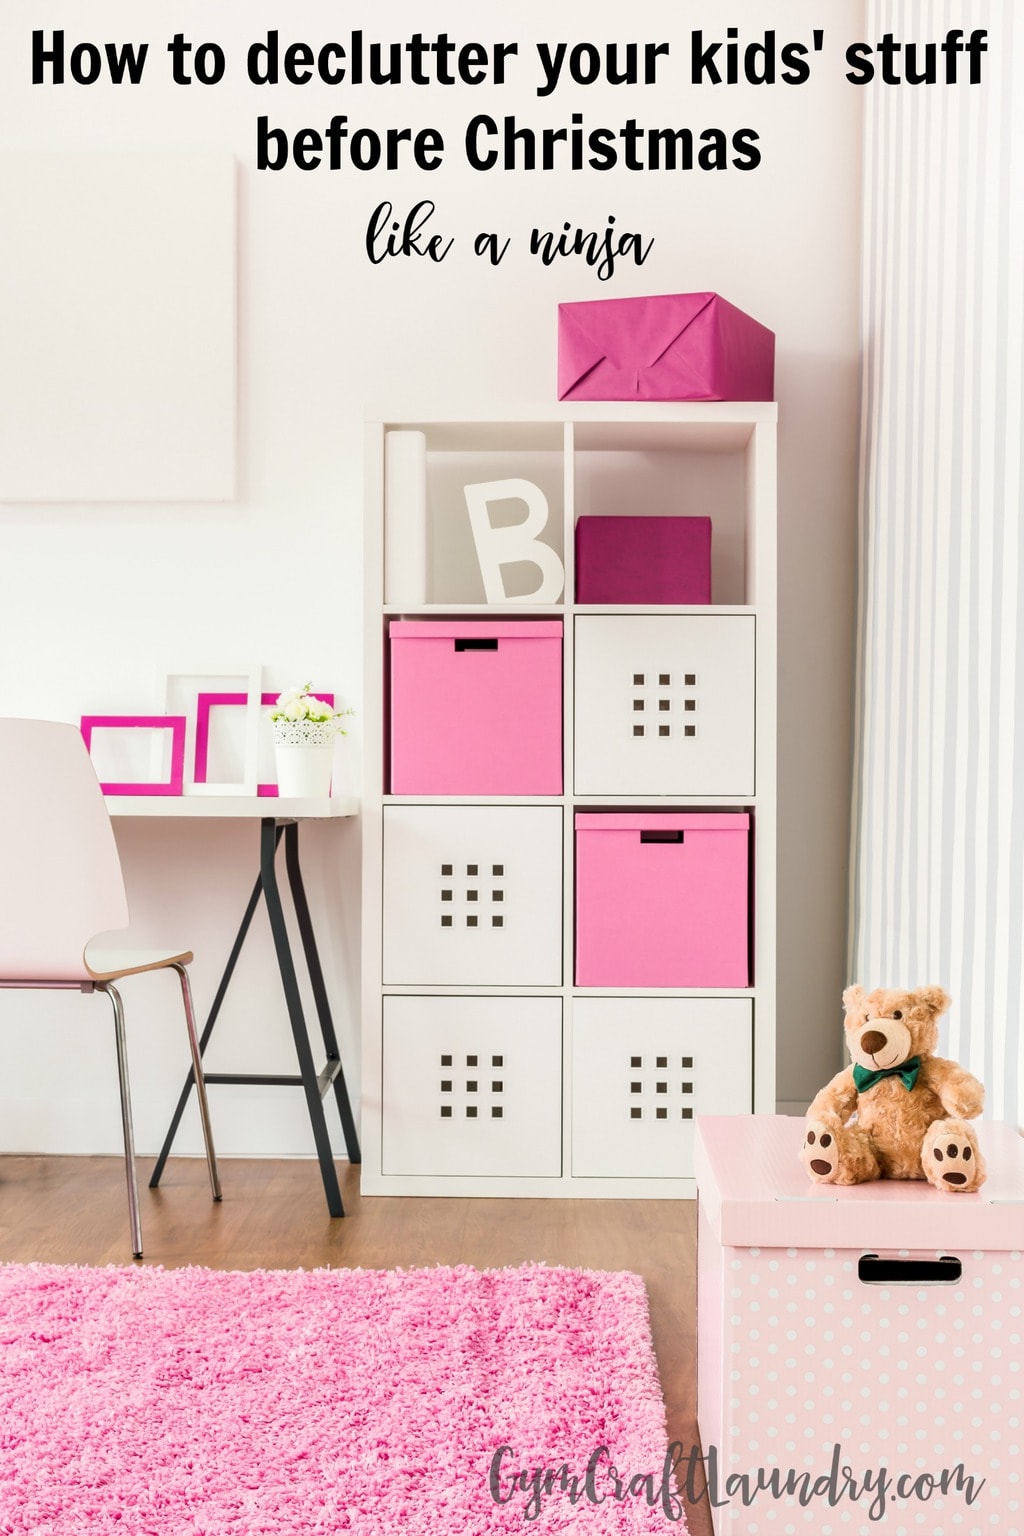 How to declutter your kids stuff before Christmas like a Ninja